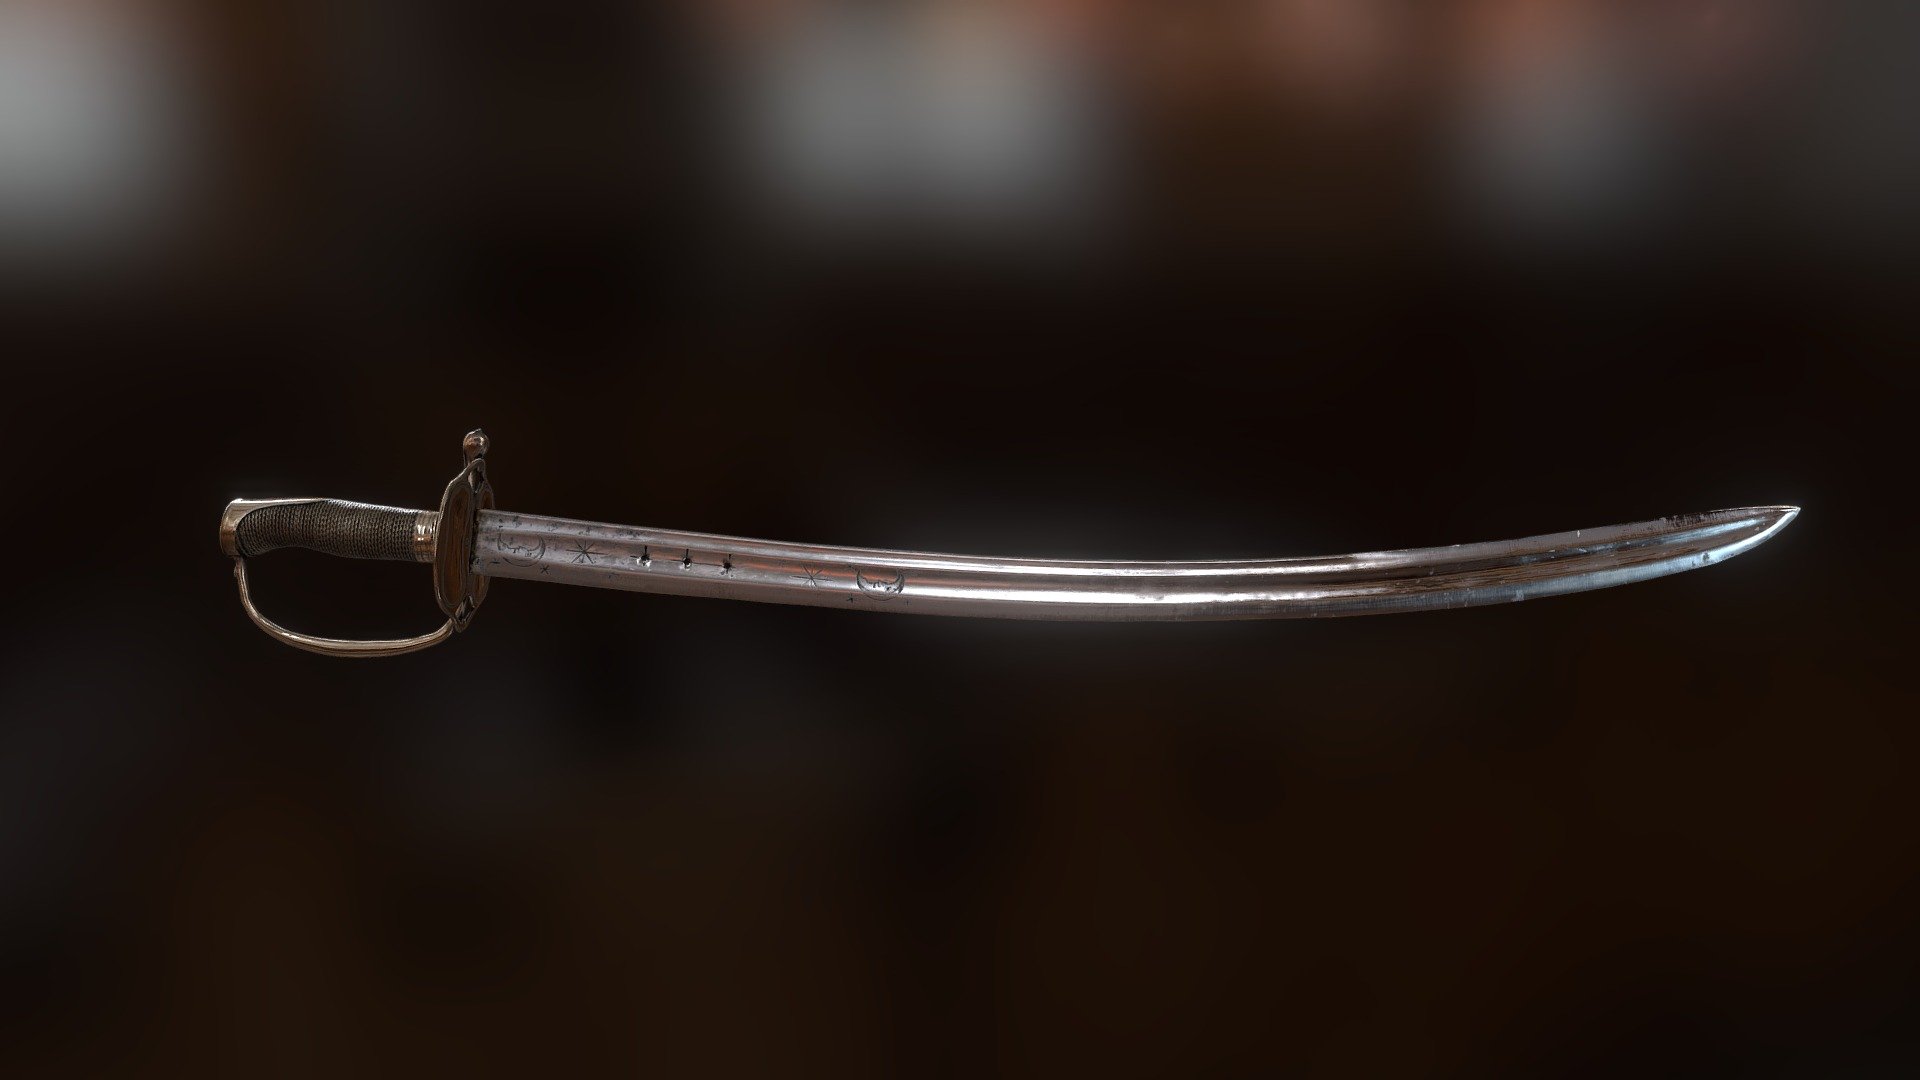 This is a model of an 18th Century English hanger sword that I made originally using RealityCapture. I've returned to my original model, retopologized it, reworked the textures, and cleaned it up in some spots that needed manual attention. I'm quite happy with the result, and look forward to incorporating retopology in to my workflow more frequently. 

The blade is in excellent condition, and the hilt is a finely crafted work of silver. Both maintain an almost mirrored finish, presenting an enormous challenge to capture through photogrammetry. The initial model turned out okay considering the conditions, but several parts of the model had issues with continuity of the normals due to the nature of the more random topology of the model RealityCapture produced. This results in  razor edges looking rough and jagged, as well as the smooth mirrored surfaces appearing lumpy and unfinished.

The Original Blade - English Hanger: A Study in Retopology - 3D model by Dale Utt (@turbulentorbit) 3d model